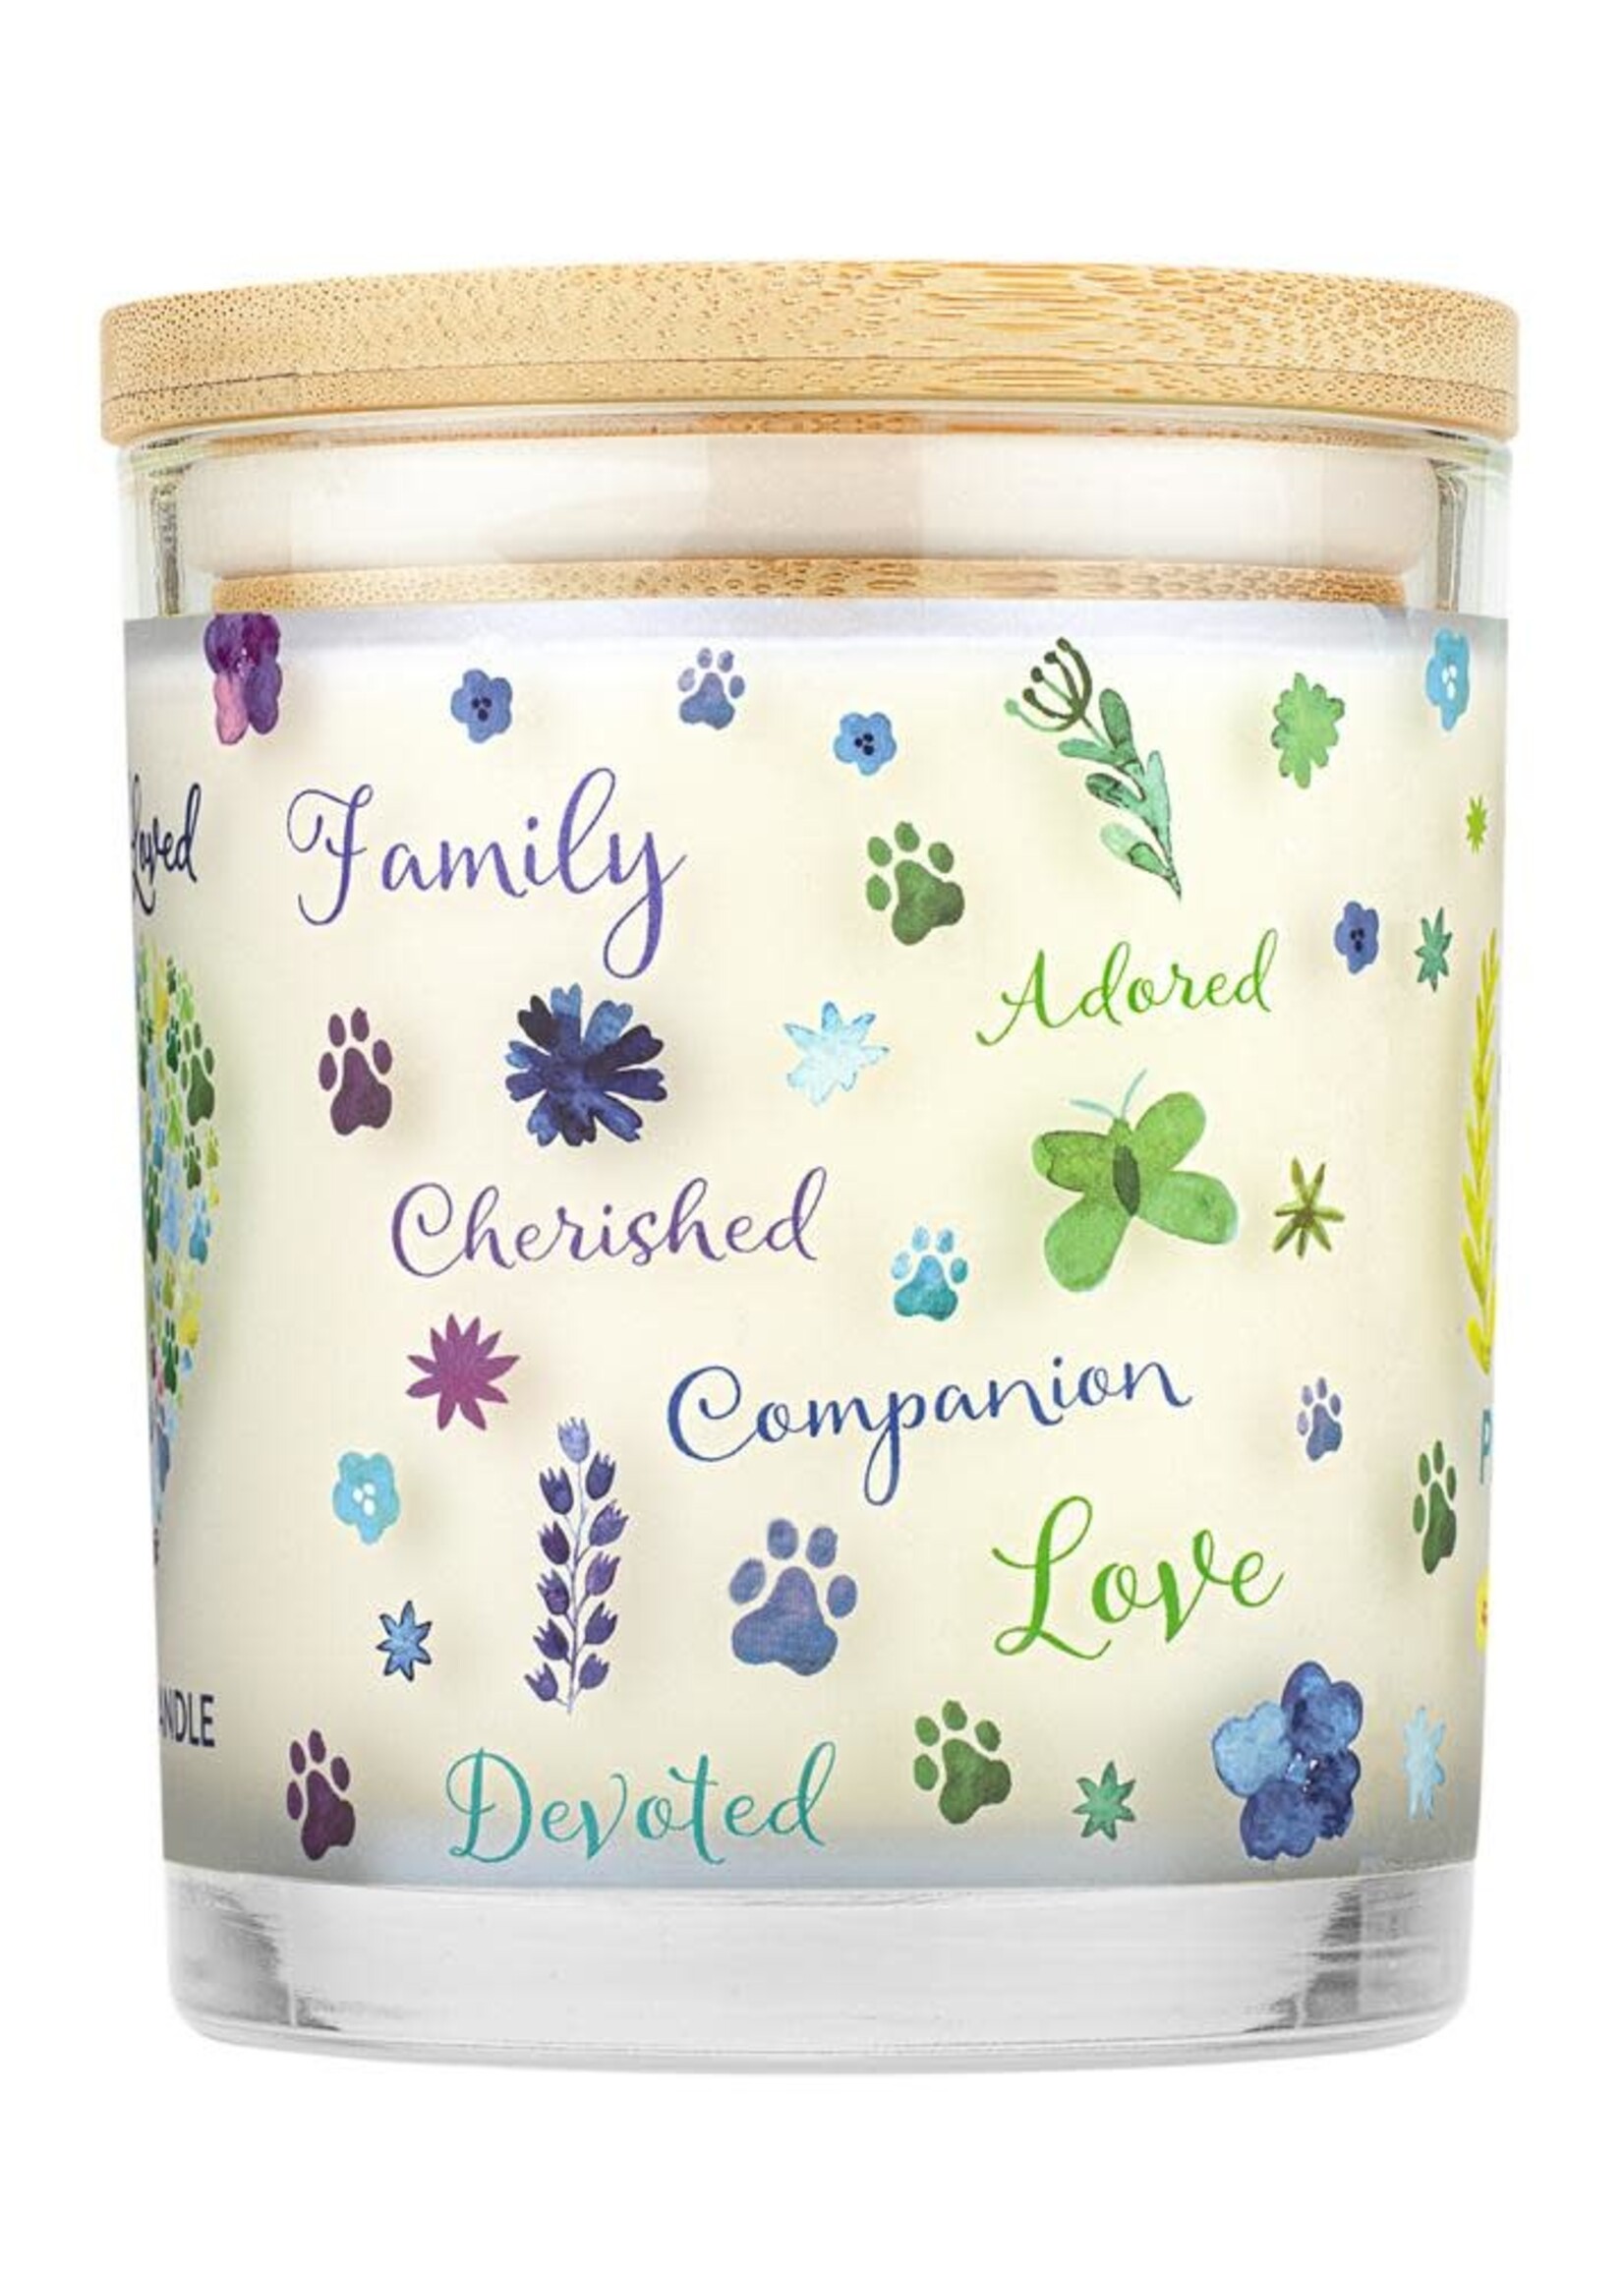 Pet House by One Fur All Furever Loved Memorial Candle